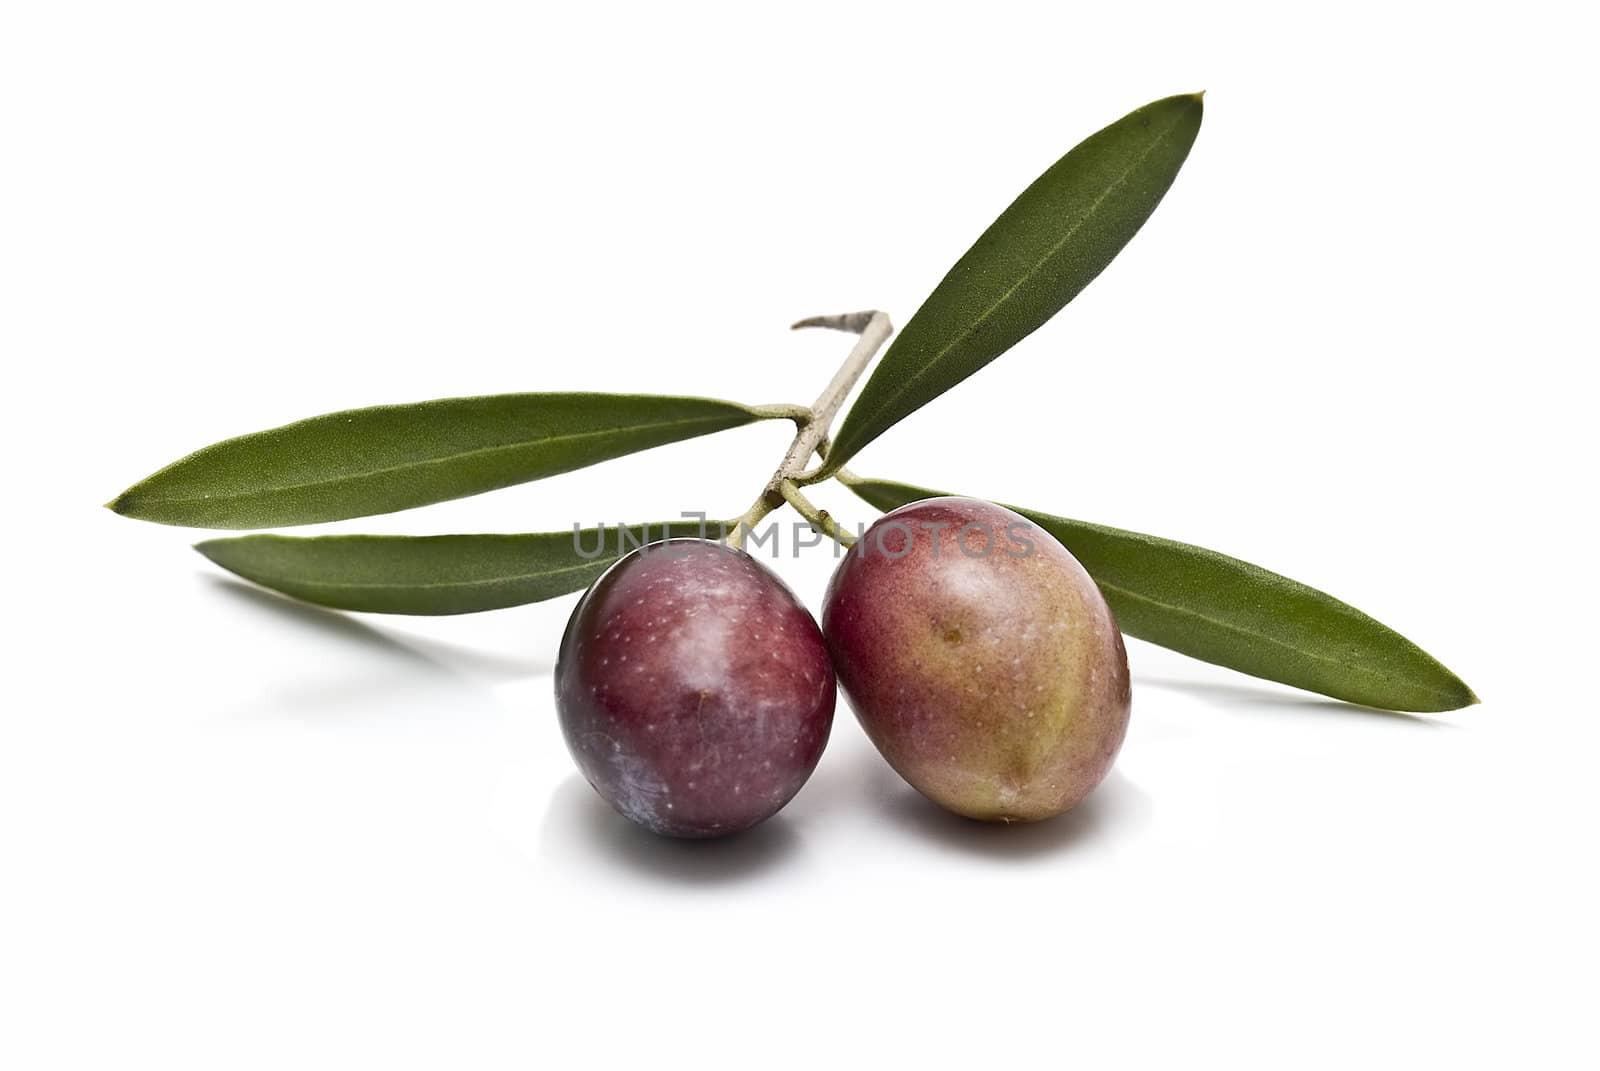 A branch with two olives.